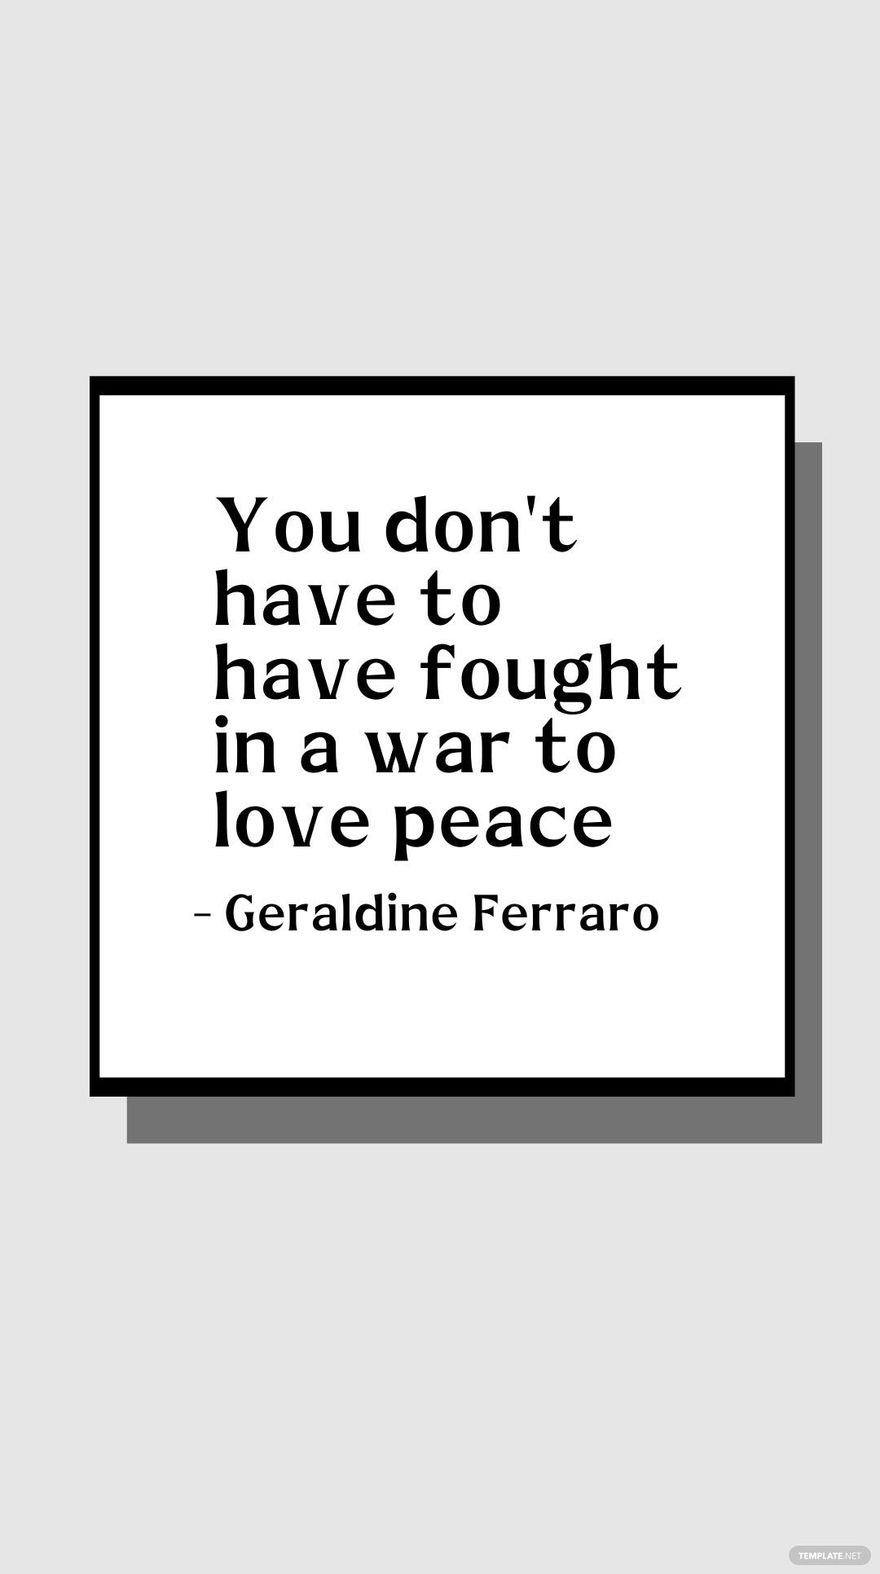 Geraldine Ferraro - You don't have to have fought in a war to love peace